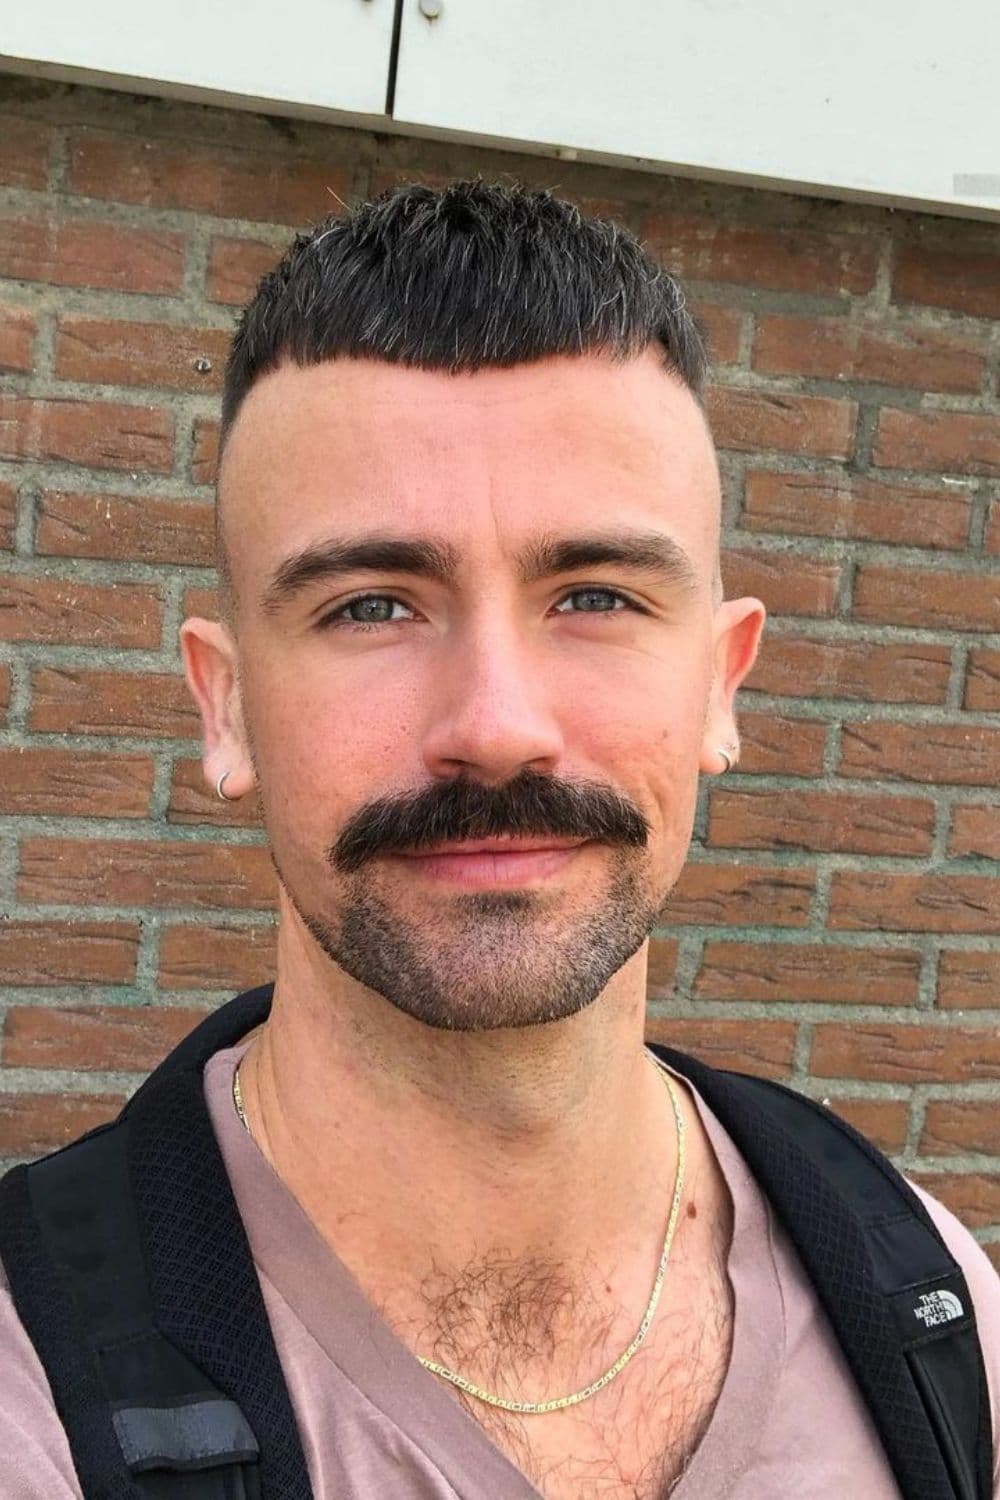 A man with a buzzed Caesar cut and a mustache.